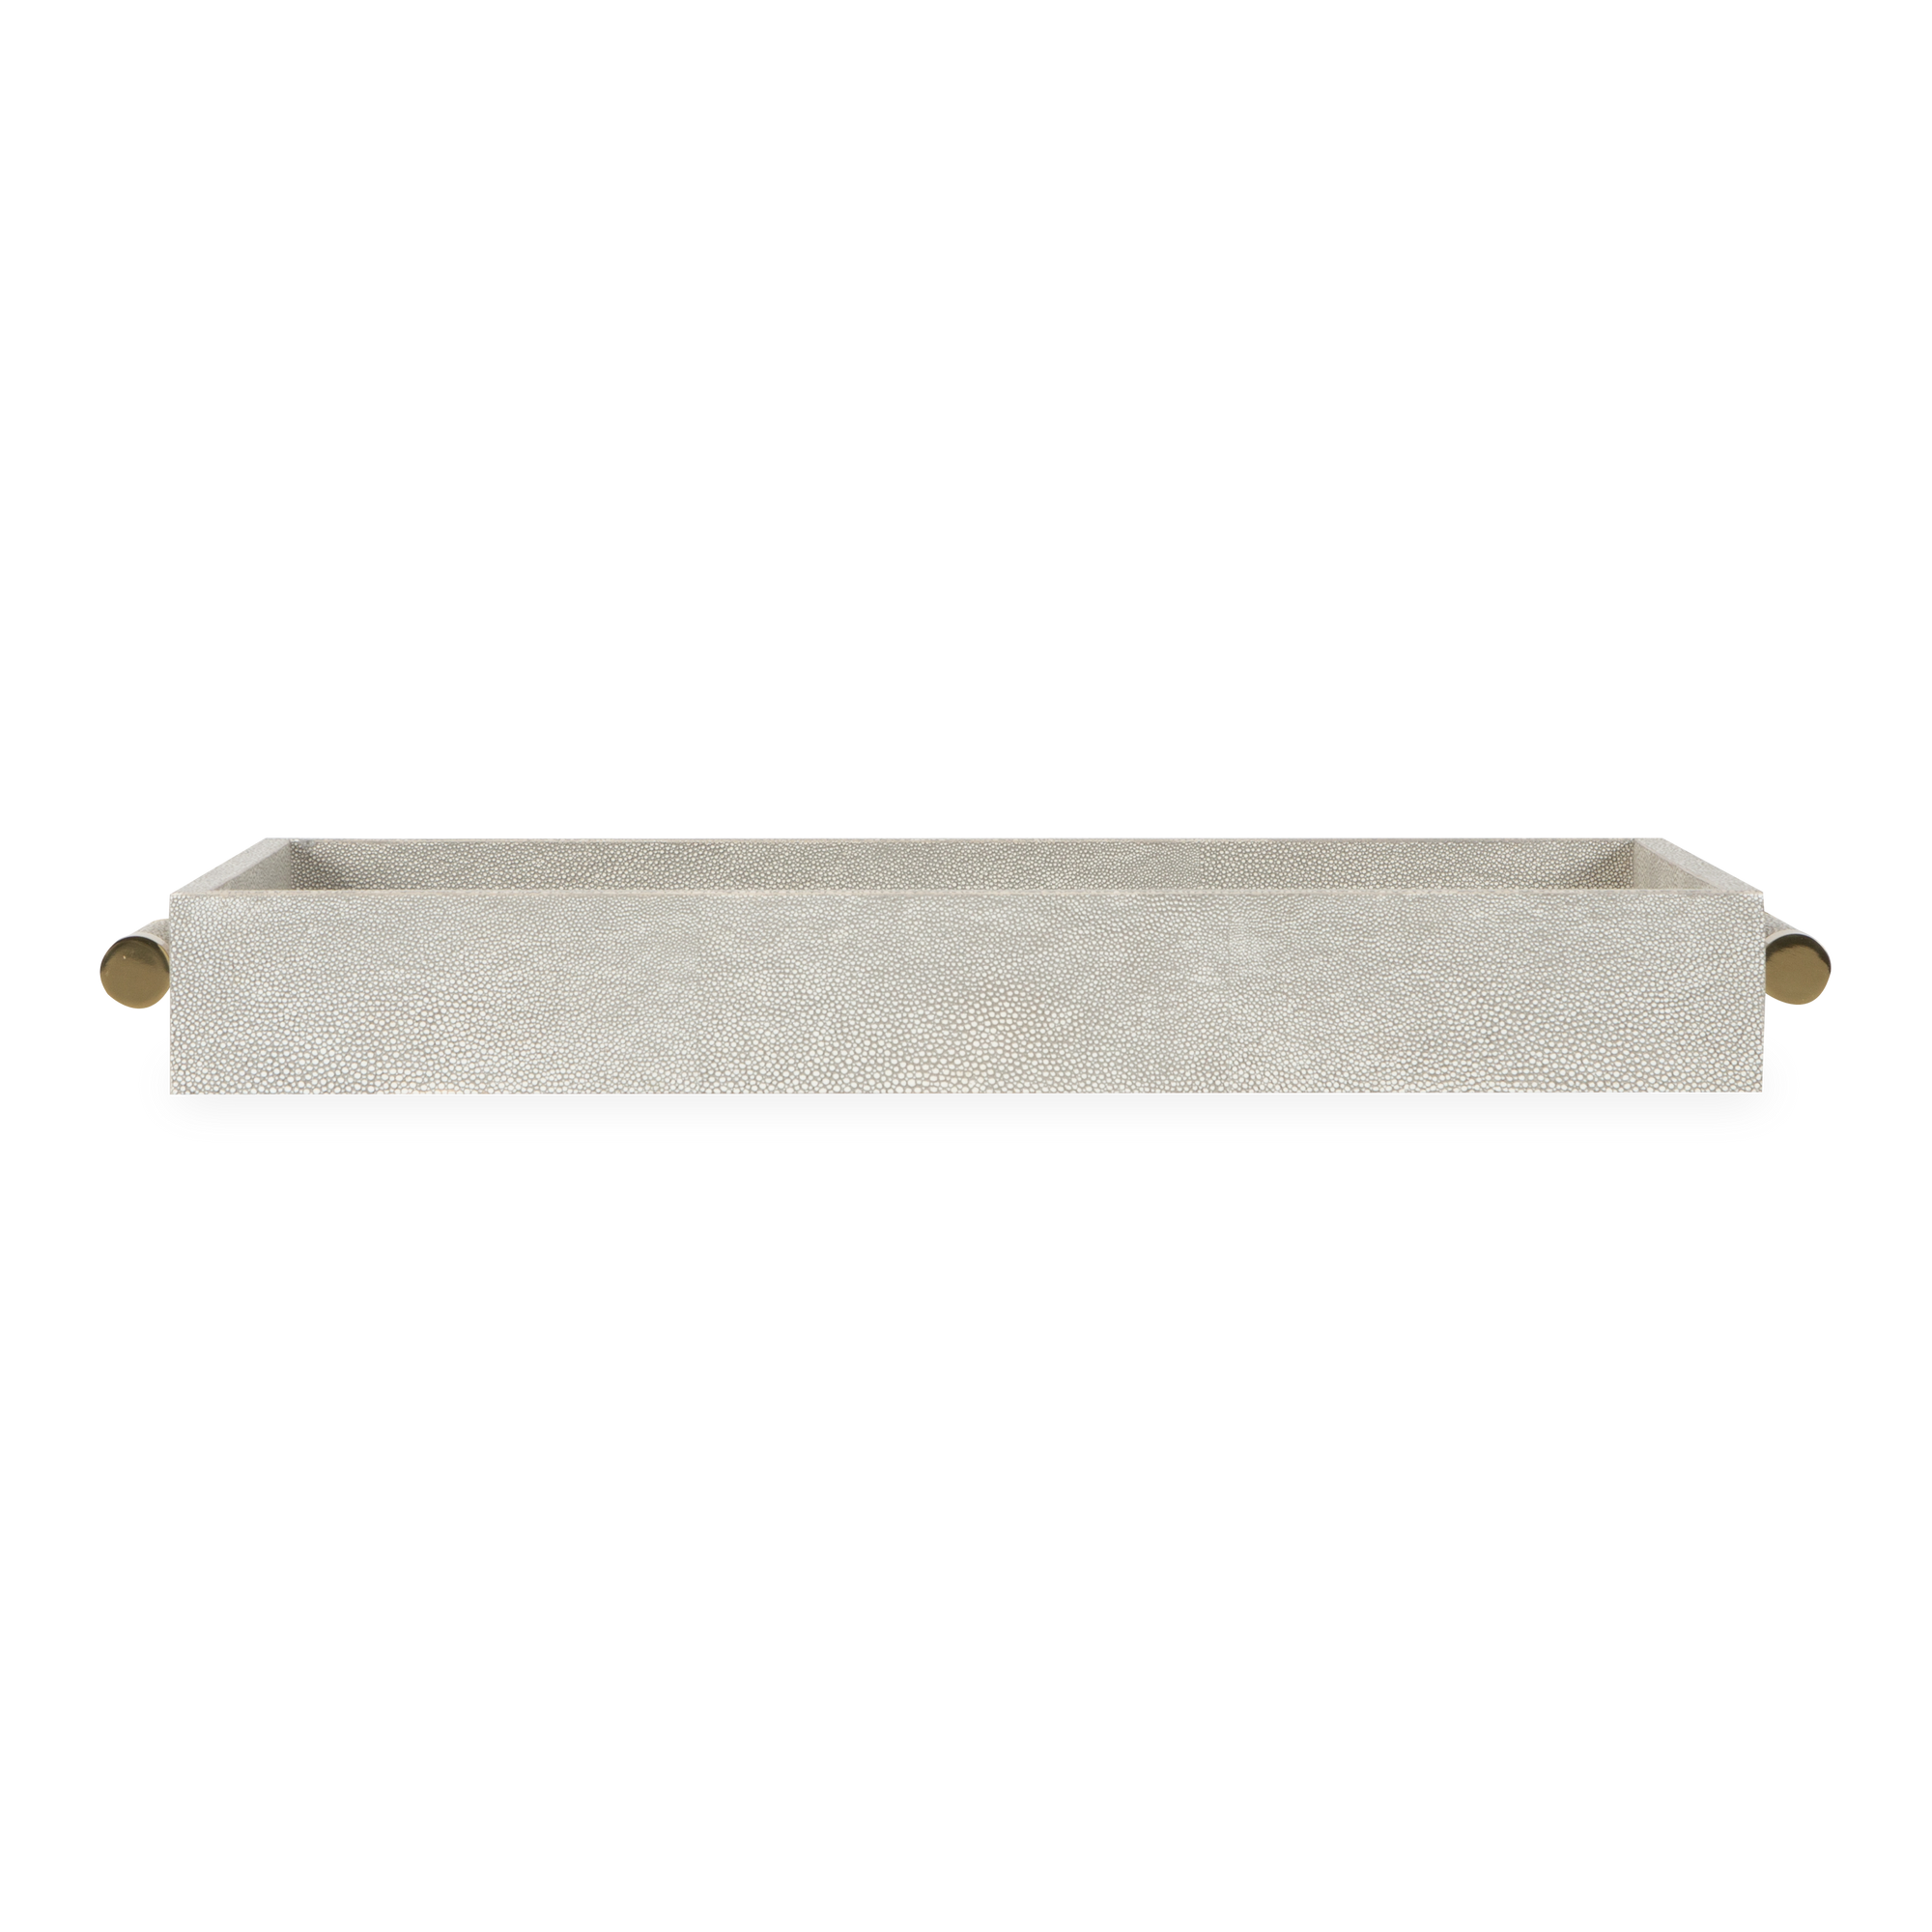 This serving tray features a delicately embossed shagreen pattern, while its brass handles add a luxurious feel.